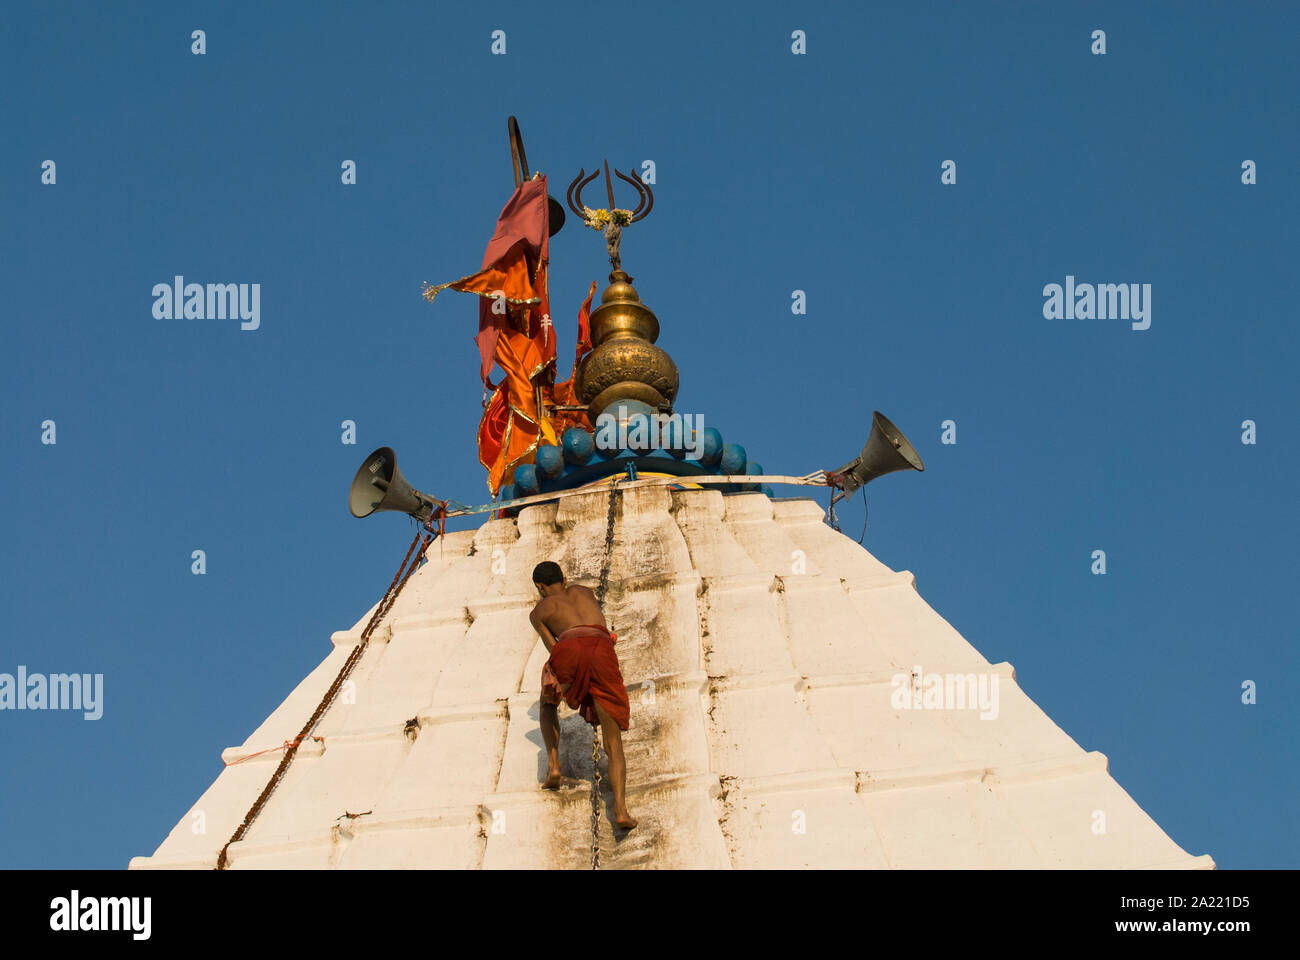 INDIA Jharkhand Deogarh , Hindu pilgrims at Shiva temple during annual festival , it is one of the holy places with a Jyothi lingam, a Phallus symbol of Hindu god Shiva / INDIEN  Jharkhand Deogarh , Hindus besuchen das Tempelfest am Shiva Tempel wo sich ein Jyothi lingam befindet Stock Photo